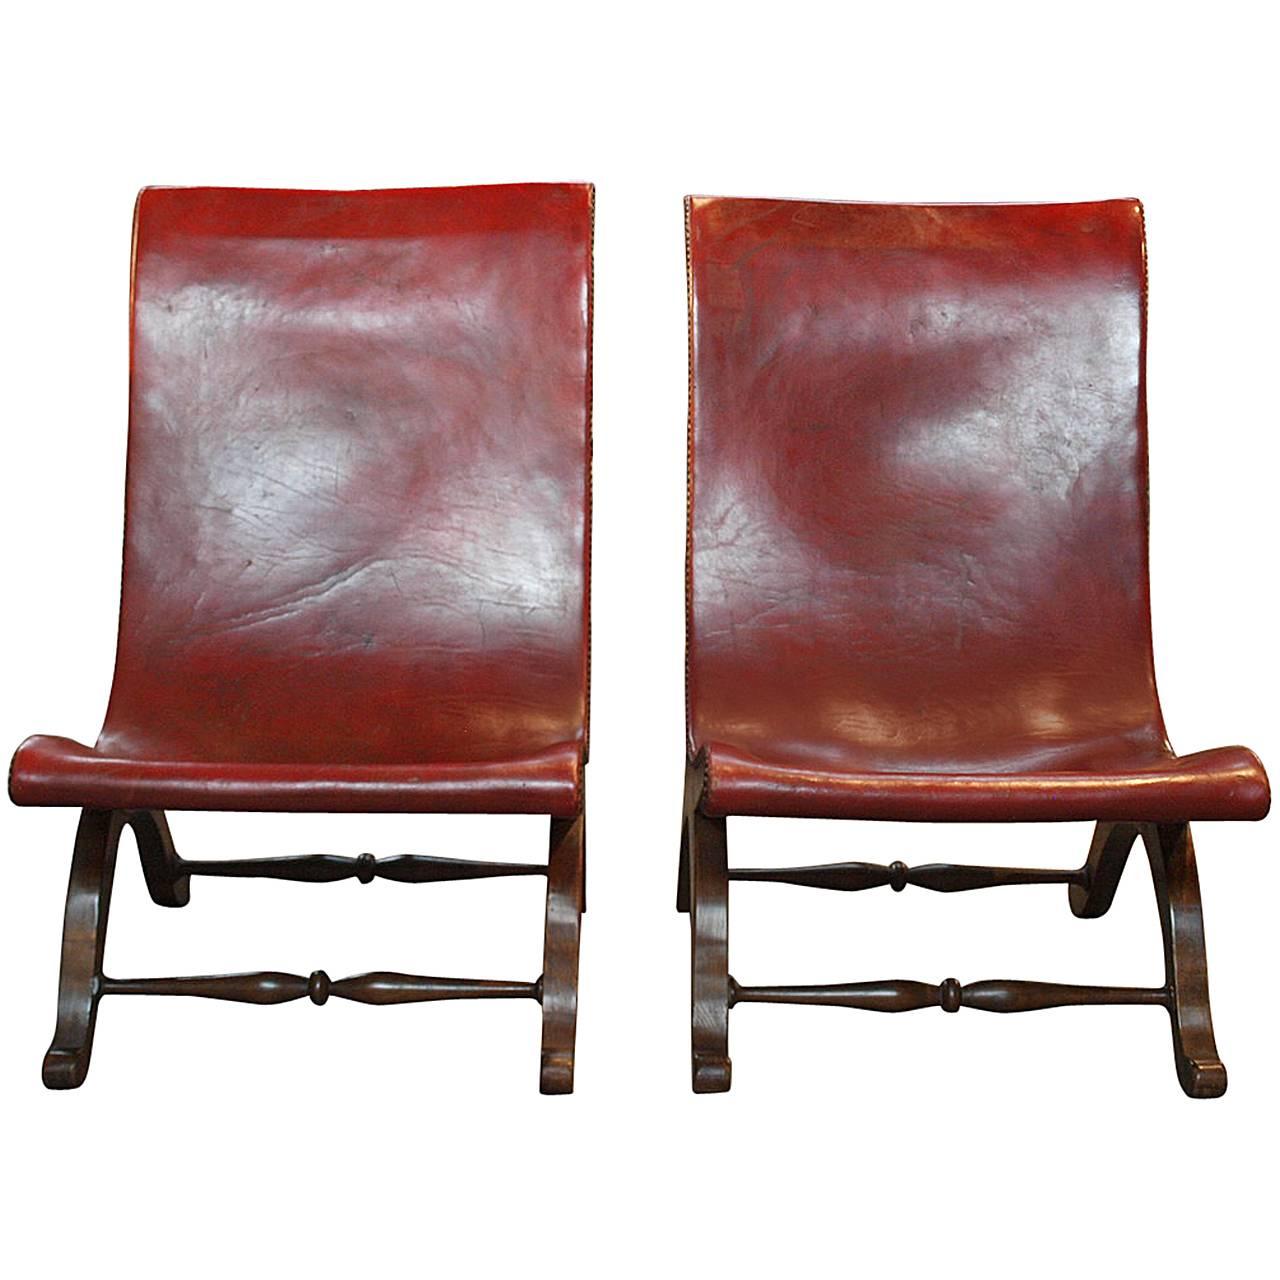 Pair of Spanish Low Sling Back Slipper Chairs in Leather